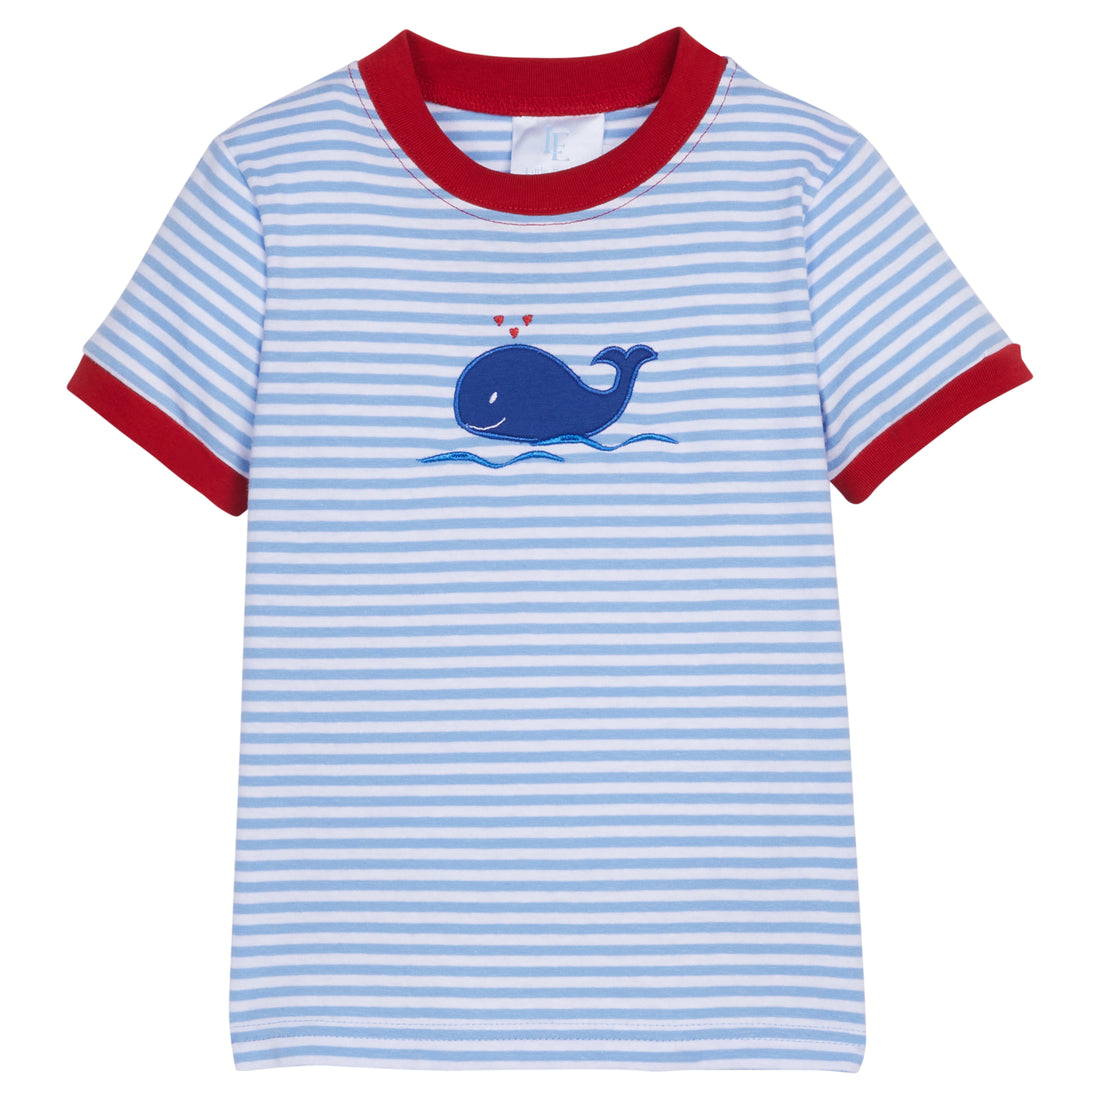 Little English classic children’s clothing, boys light blue short-sleeve striped t-shirt with red at the collar and sleeves and a blue applique whale